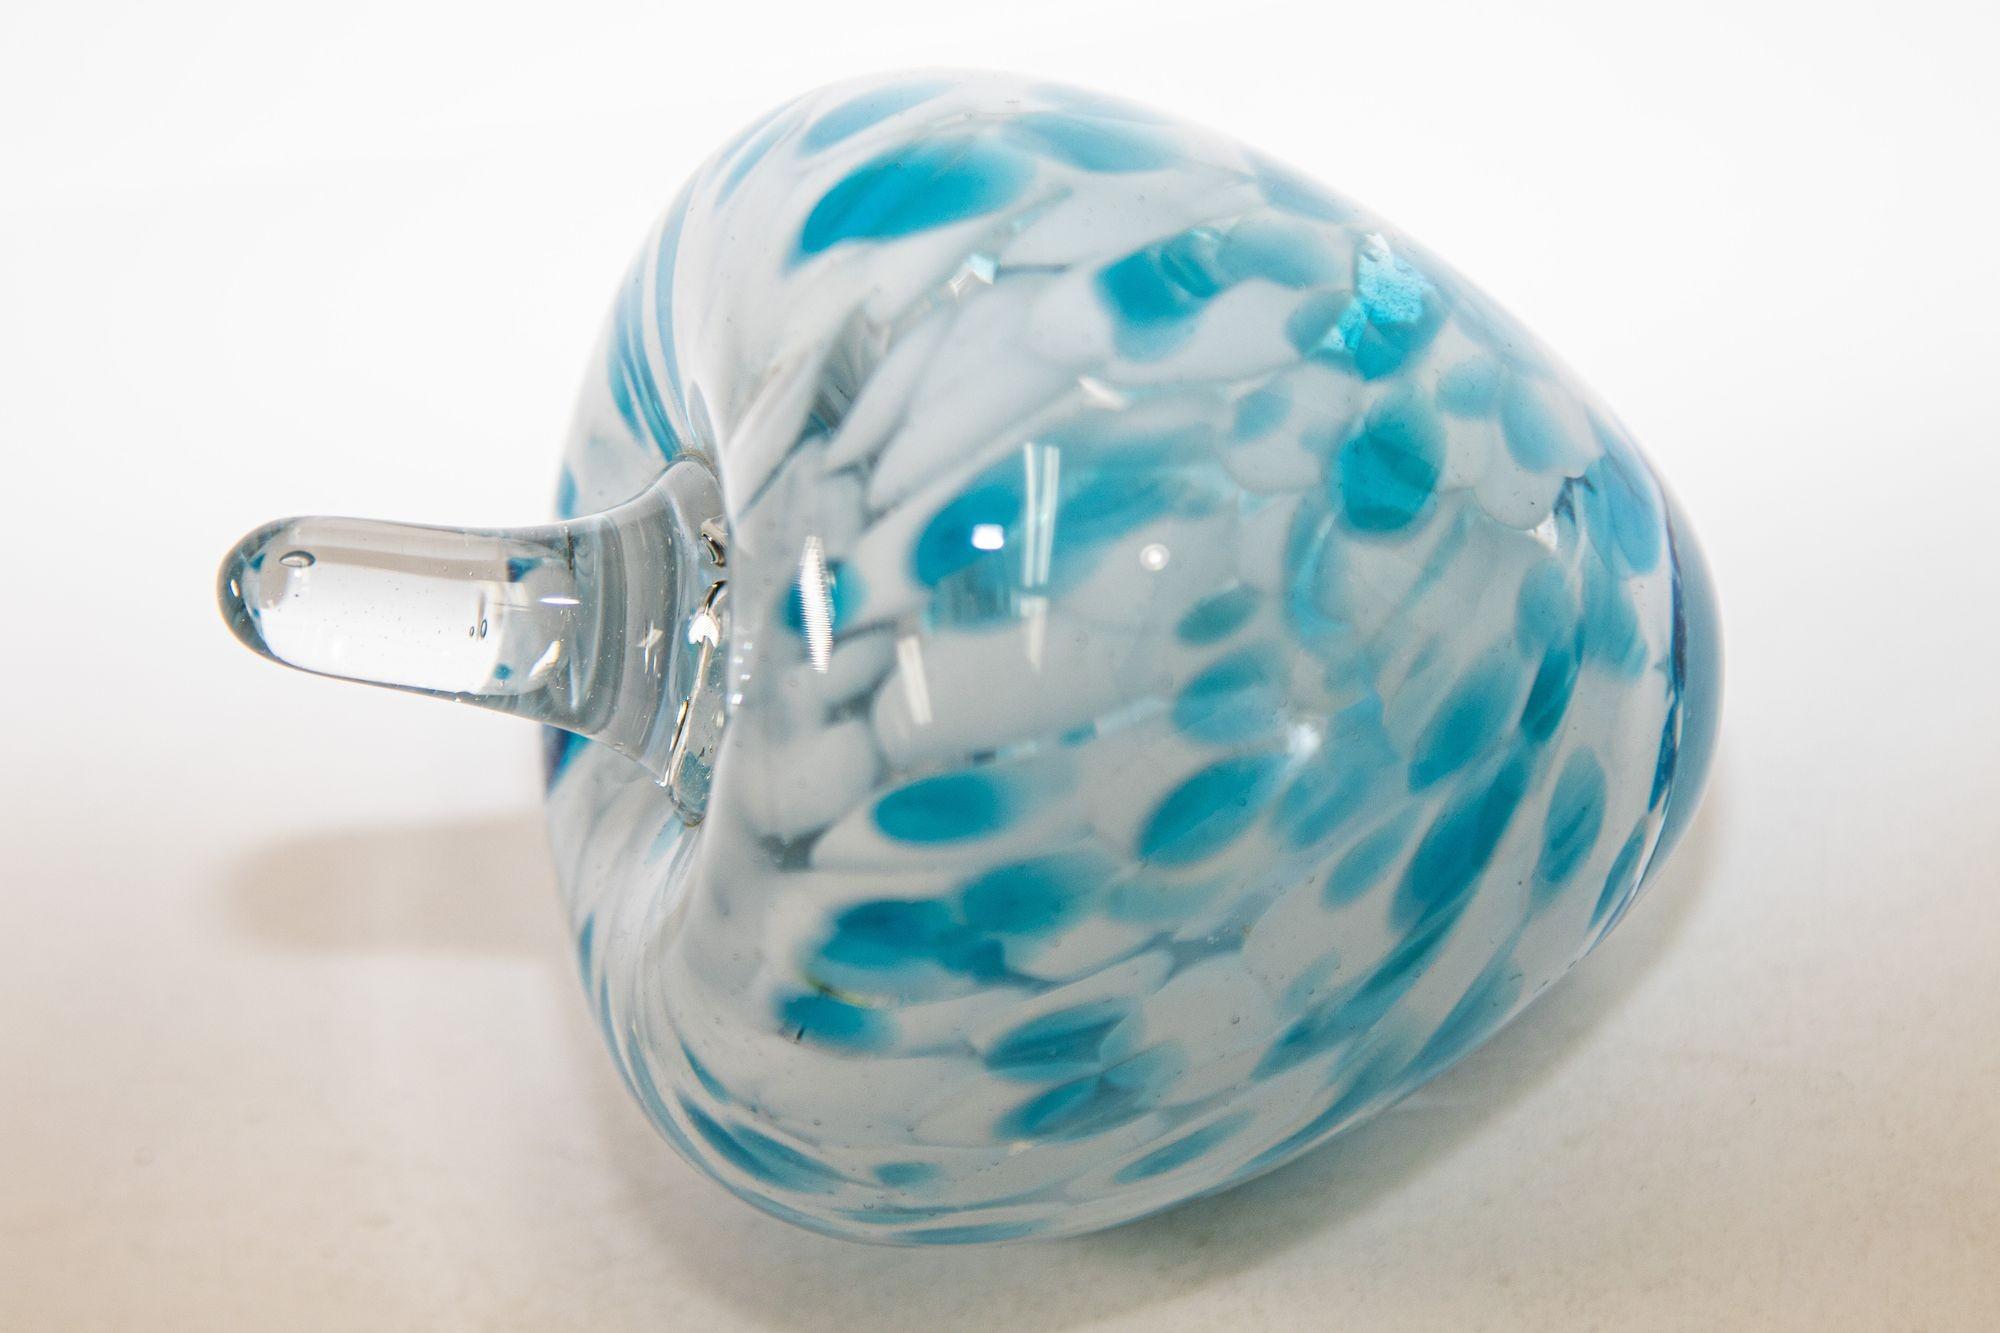 Italian Mid-Century Modern Murano Art Glass Blue and Clear Apple Sculpture Paperweight For Sale